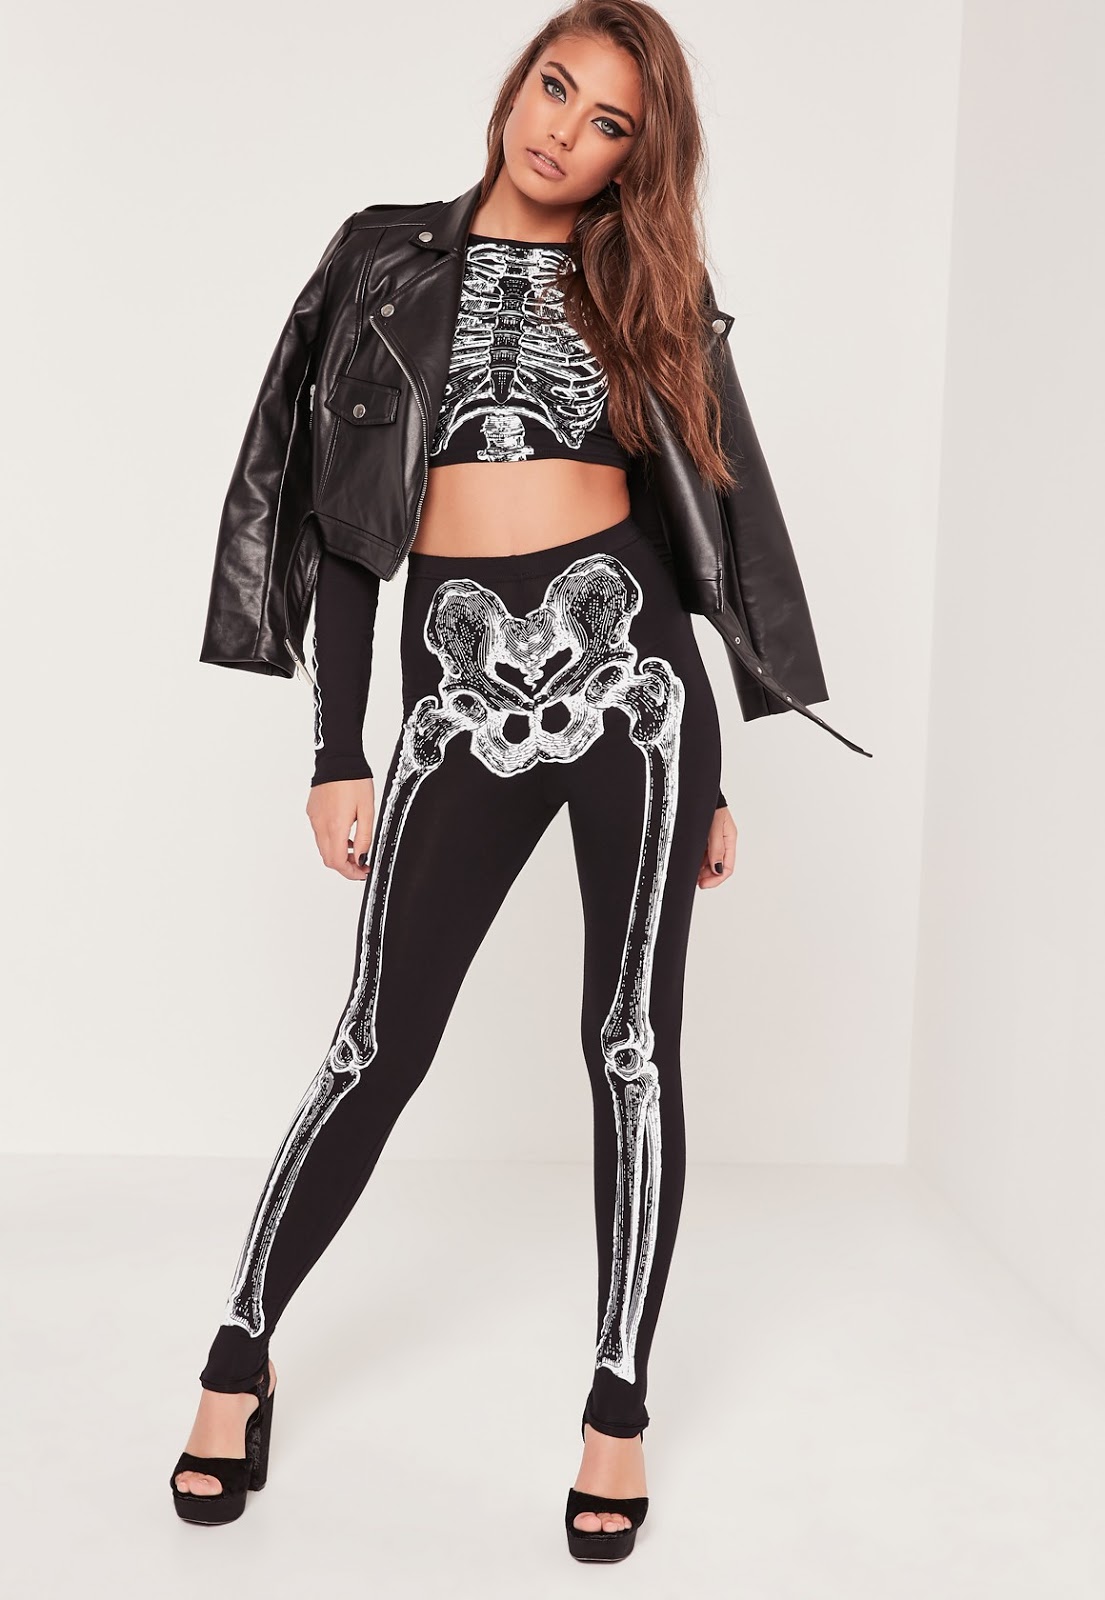 Trending: Halloween Outfit | Fashion Cognoscente